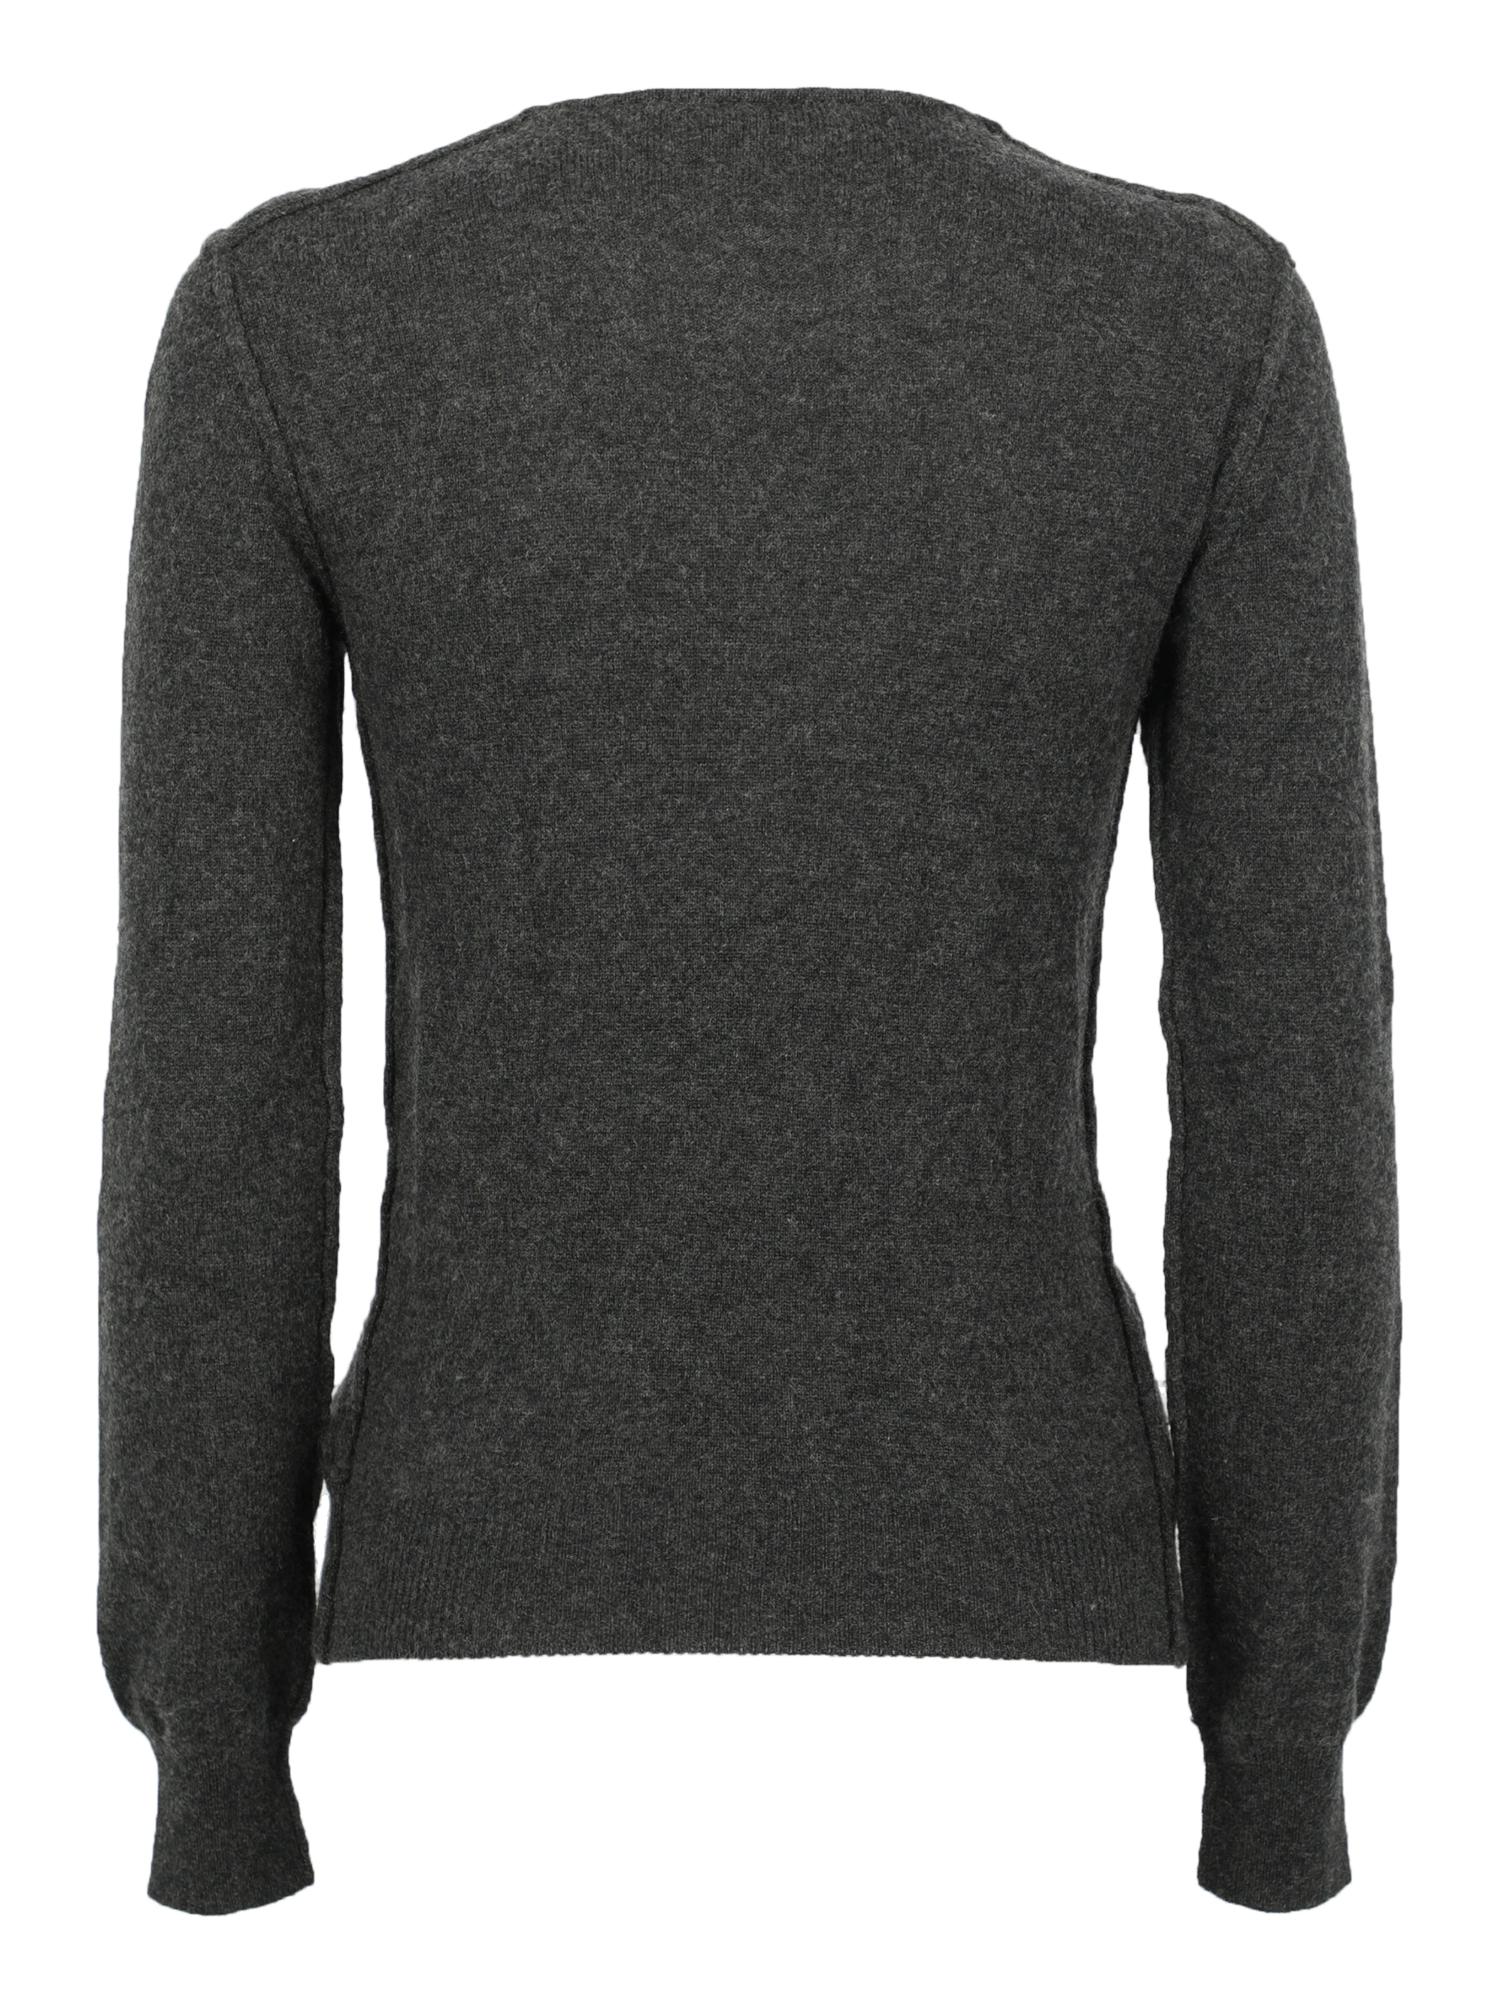 Dolce & Gabbana Wool Pullover in Anthracite (Gray) - Lyst